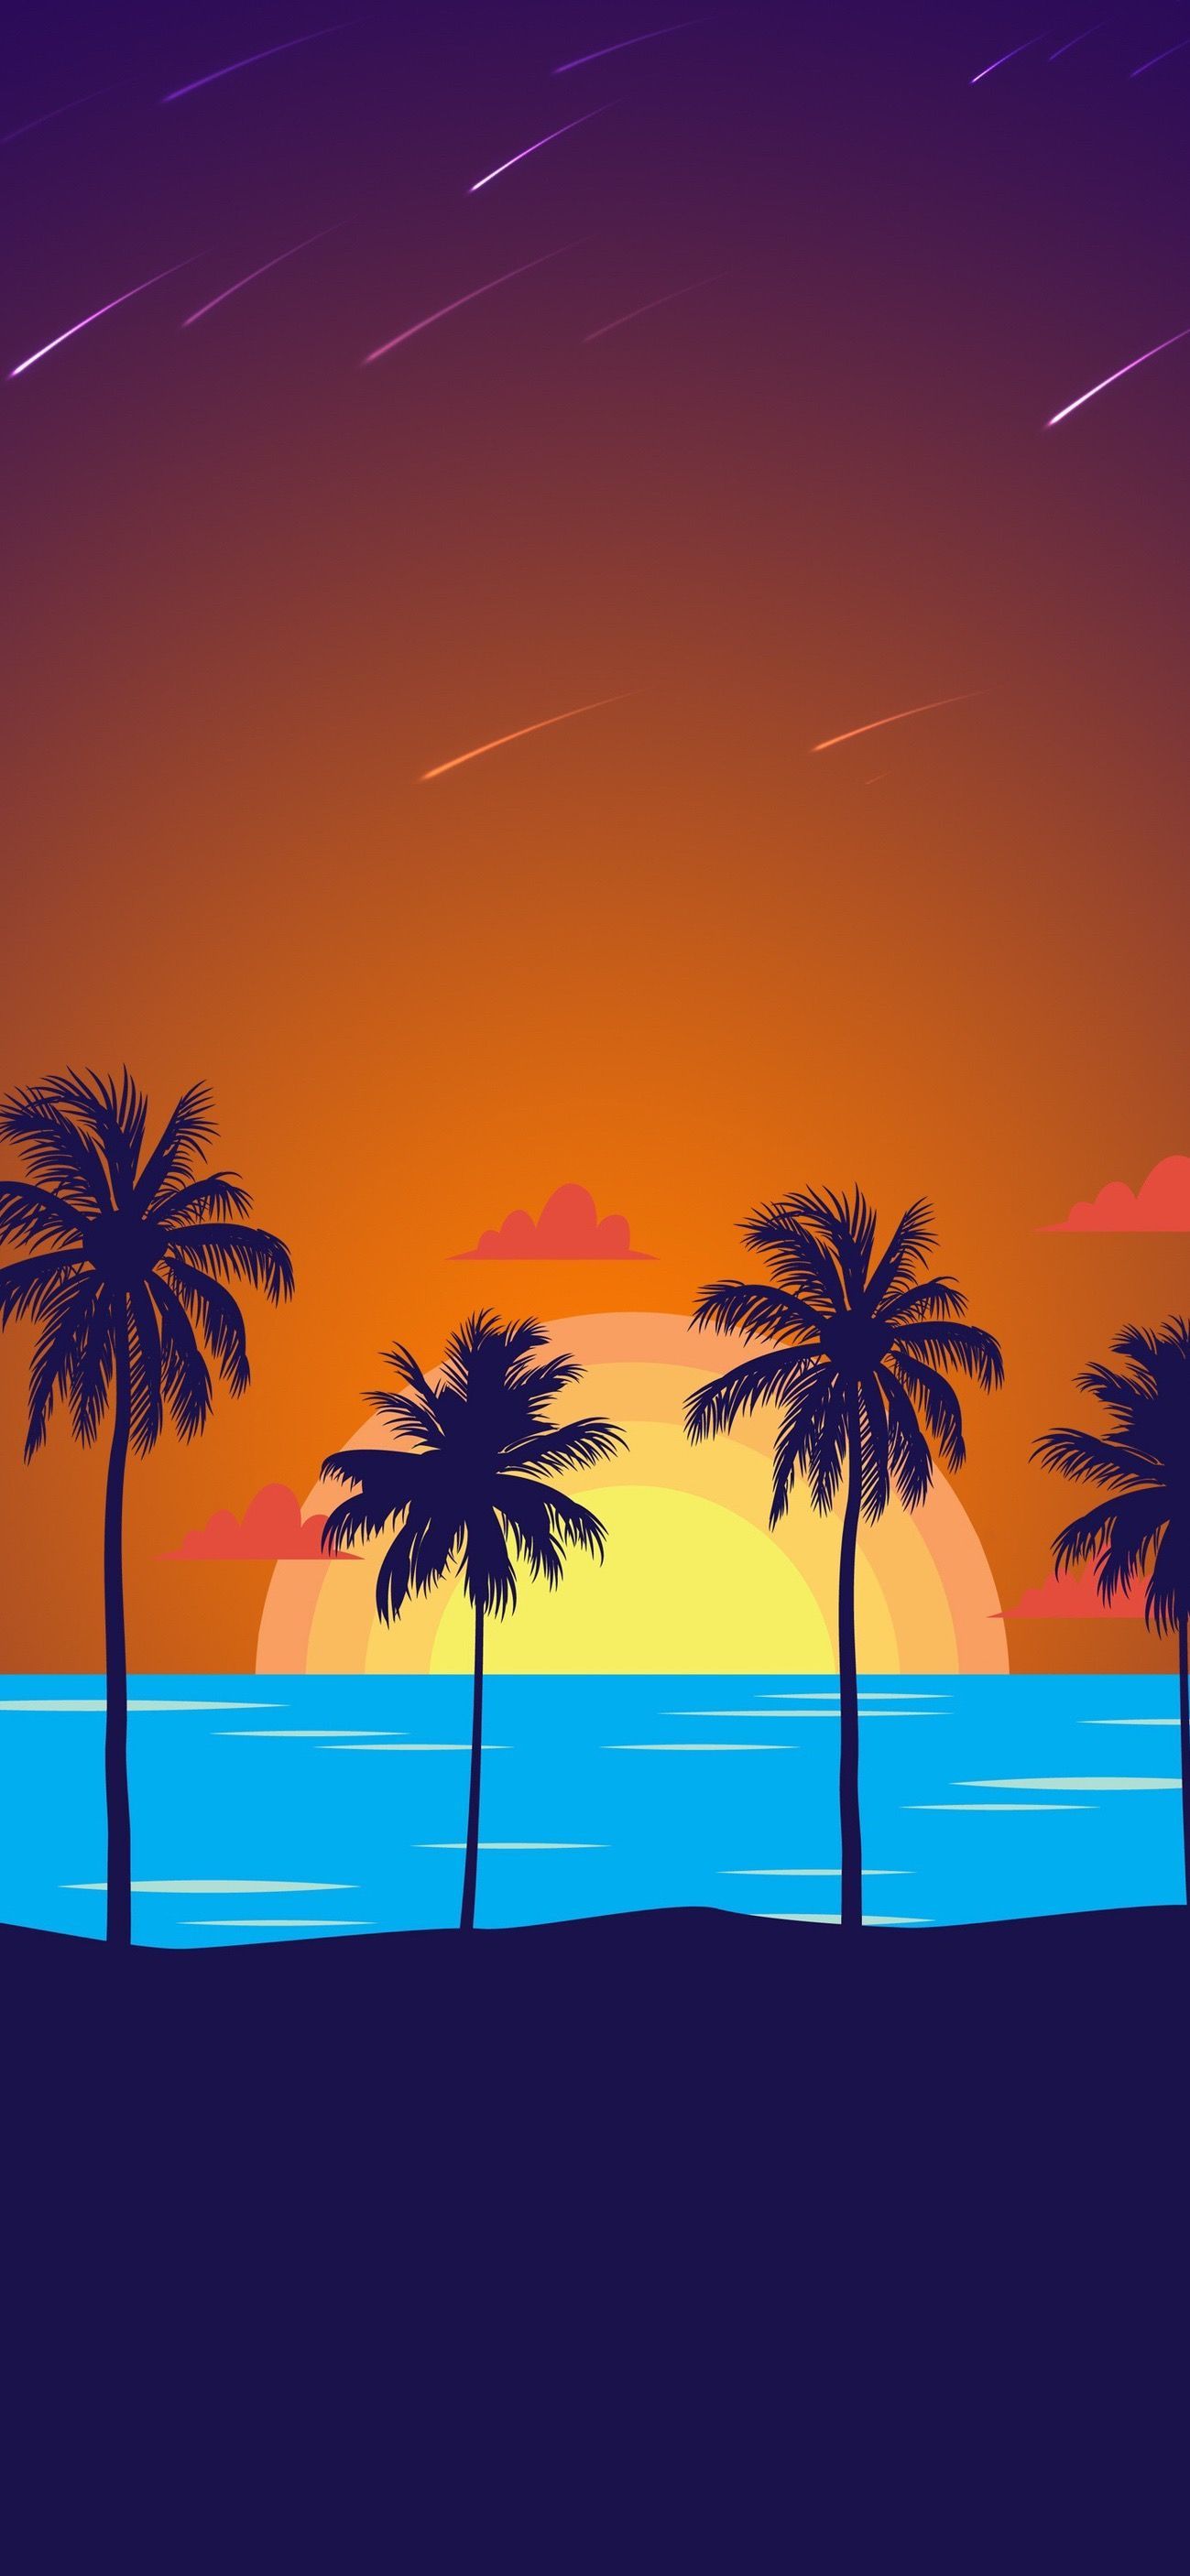 Simple Minimalistic Wallpaper Phone Background No Distractions